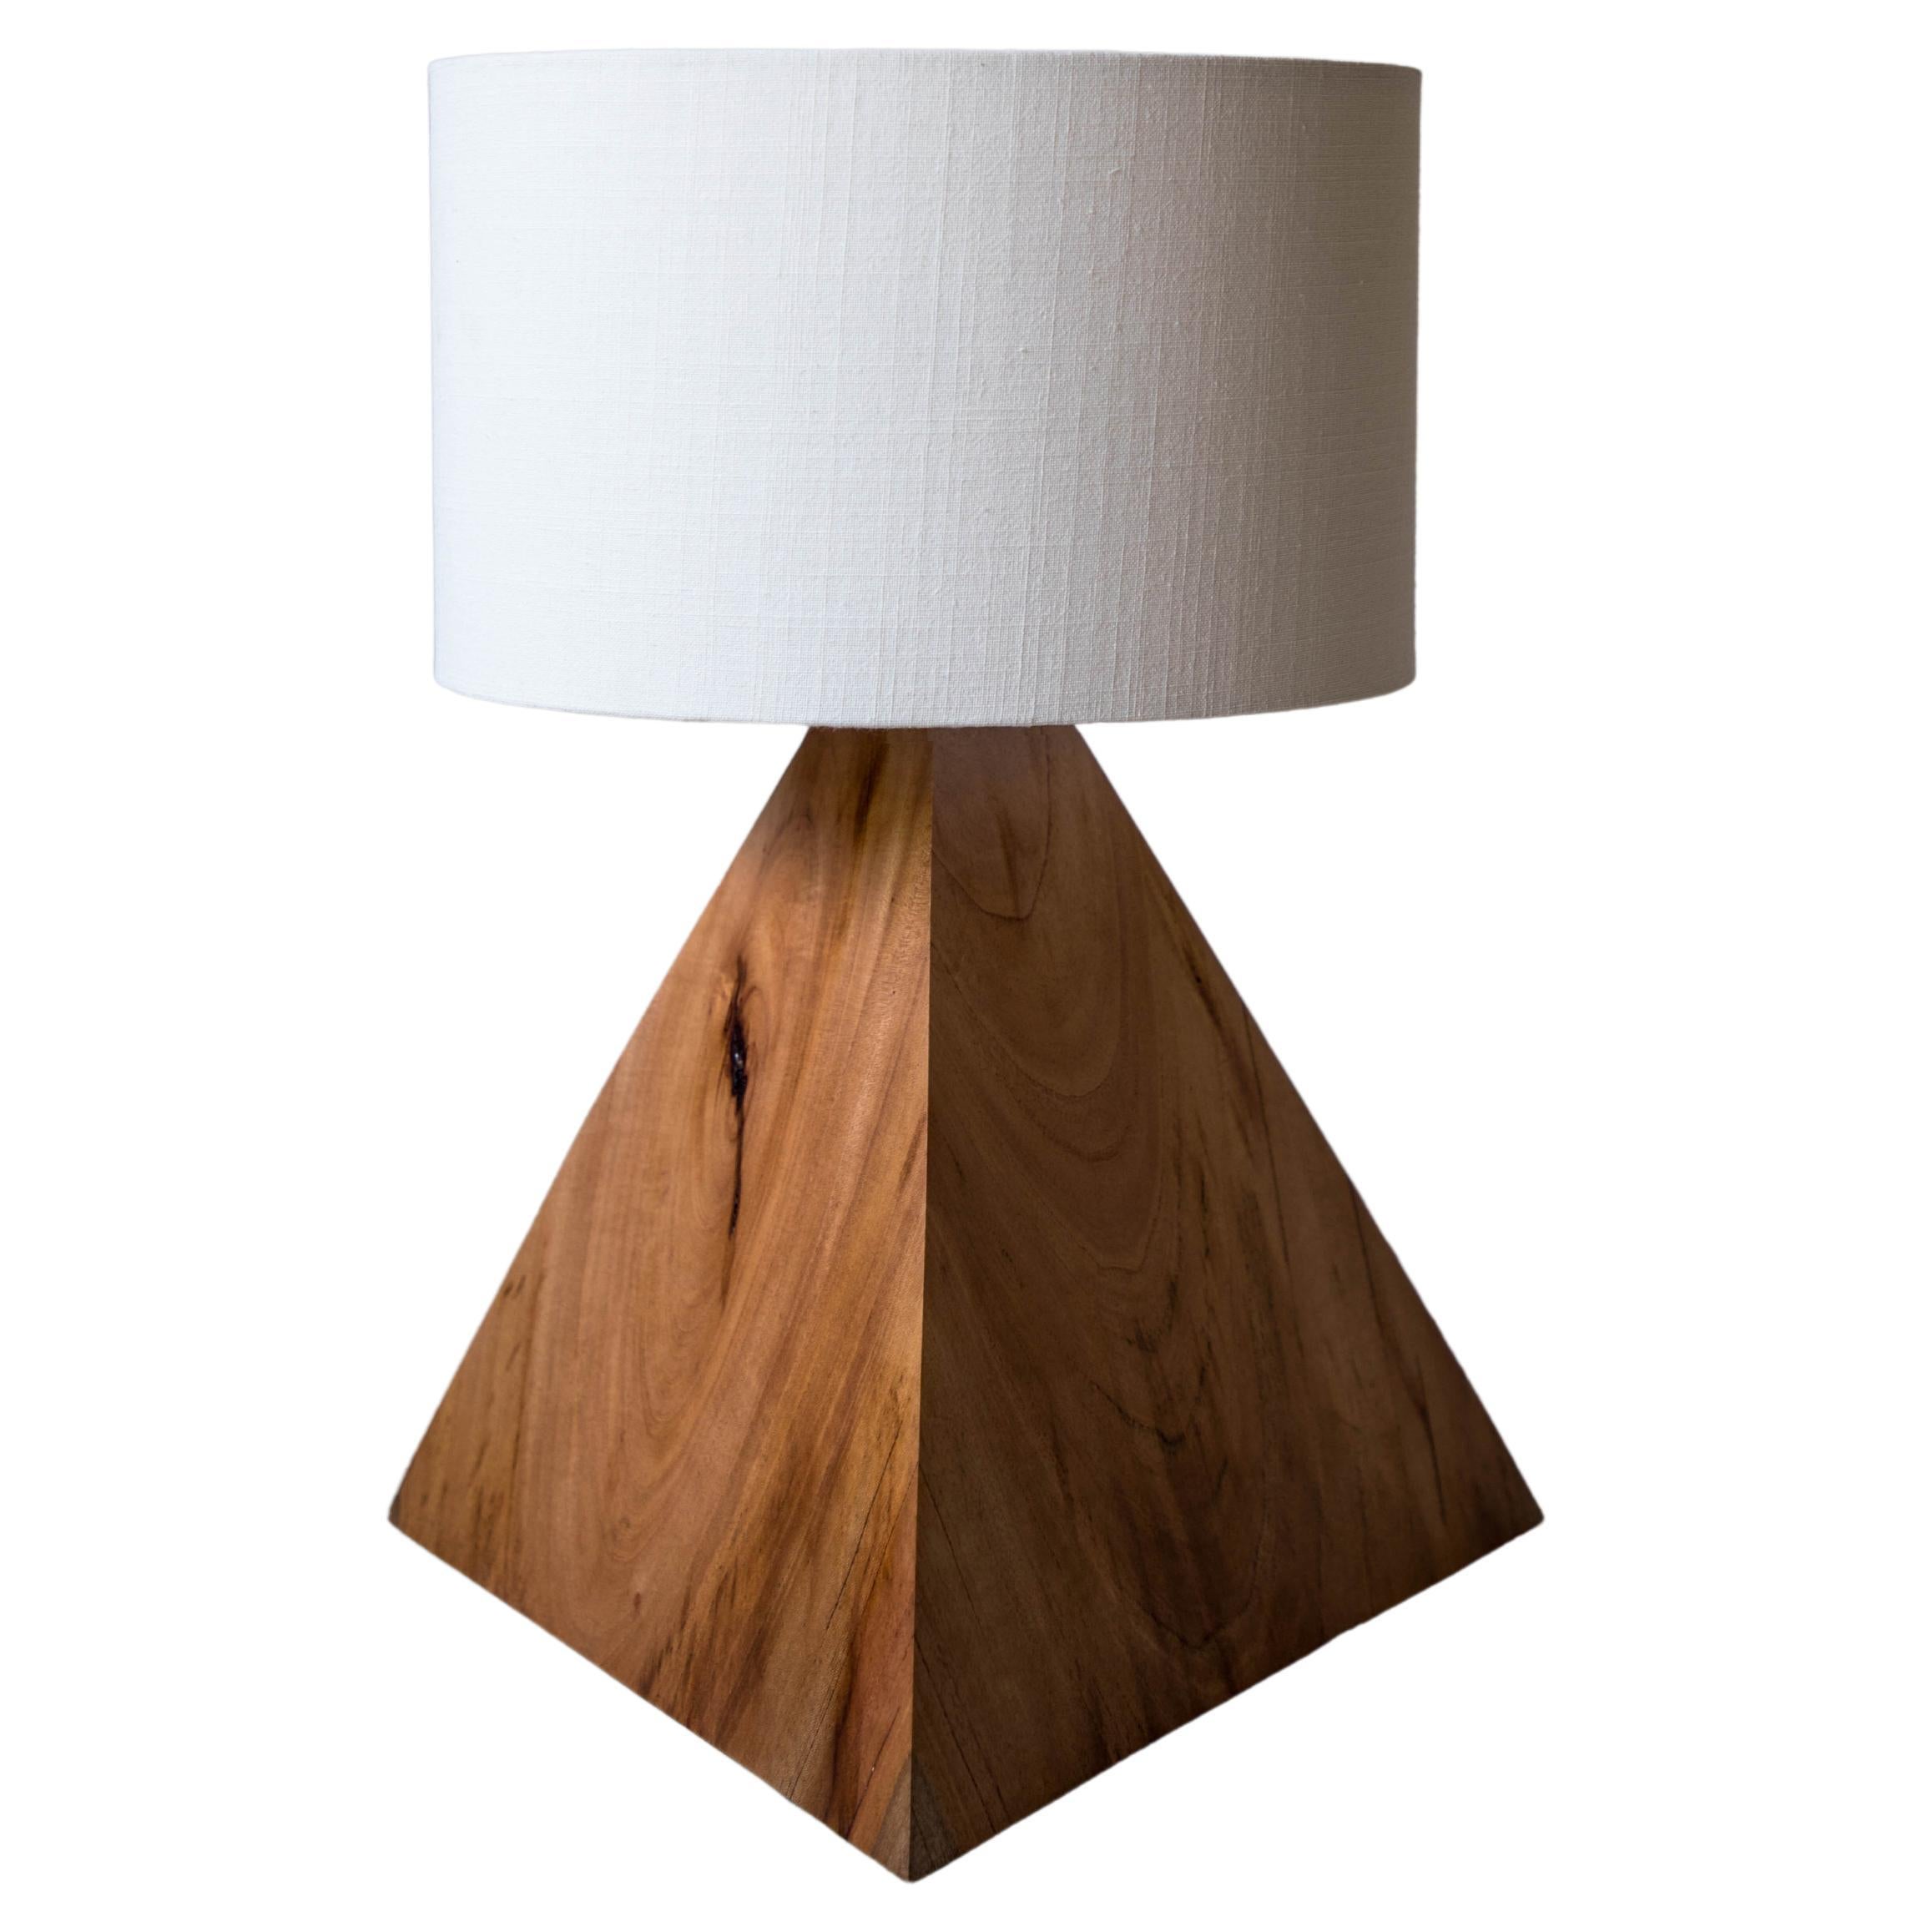 Original 07 Triangle Table Lamp with Linen Screen by Daniel Orozco For Sale